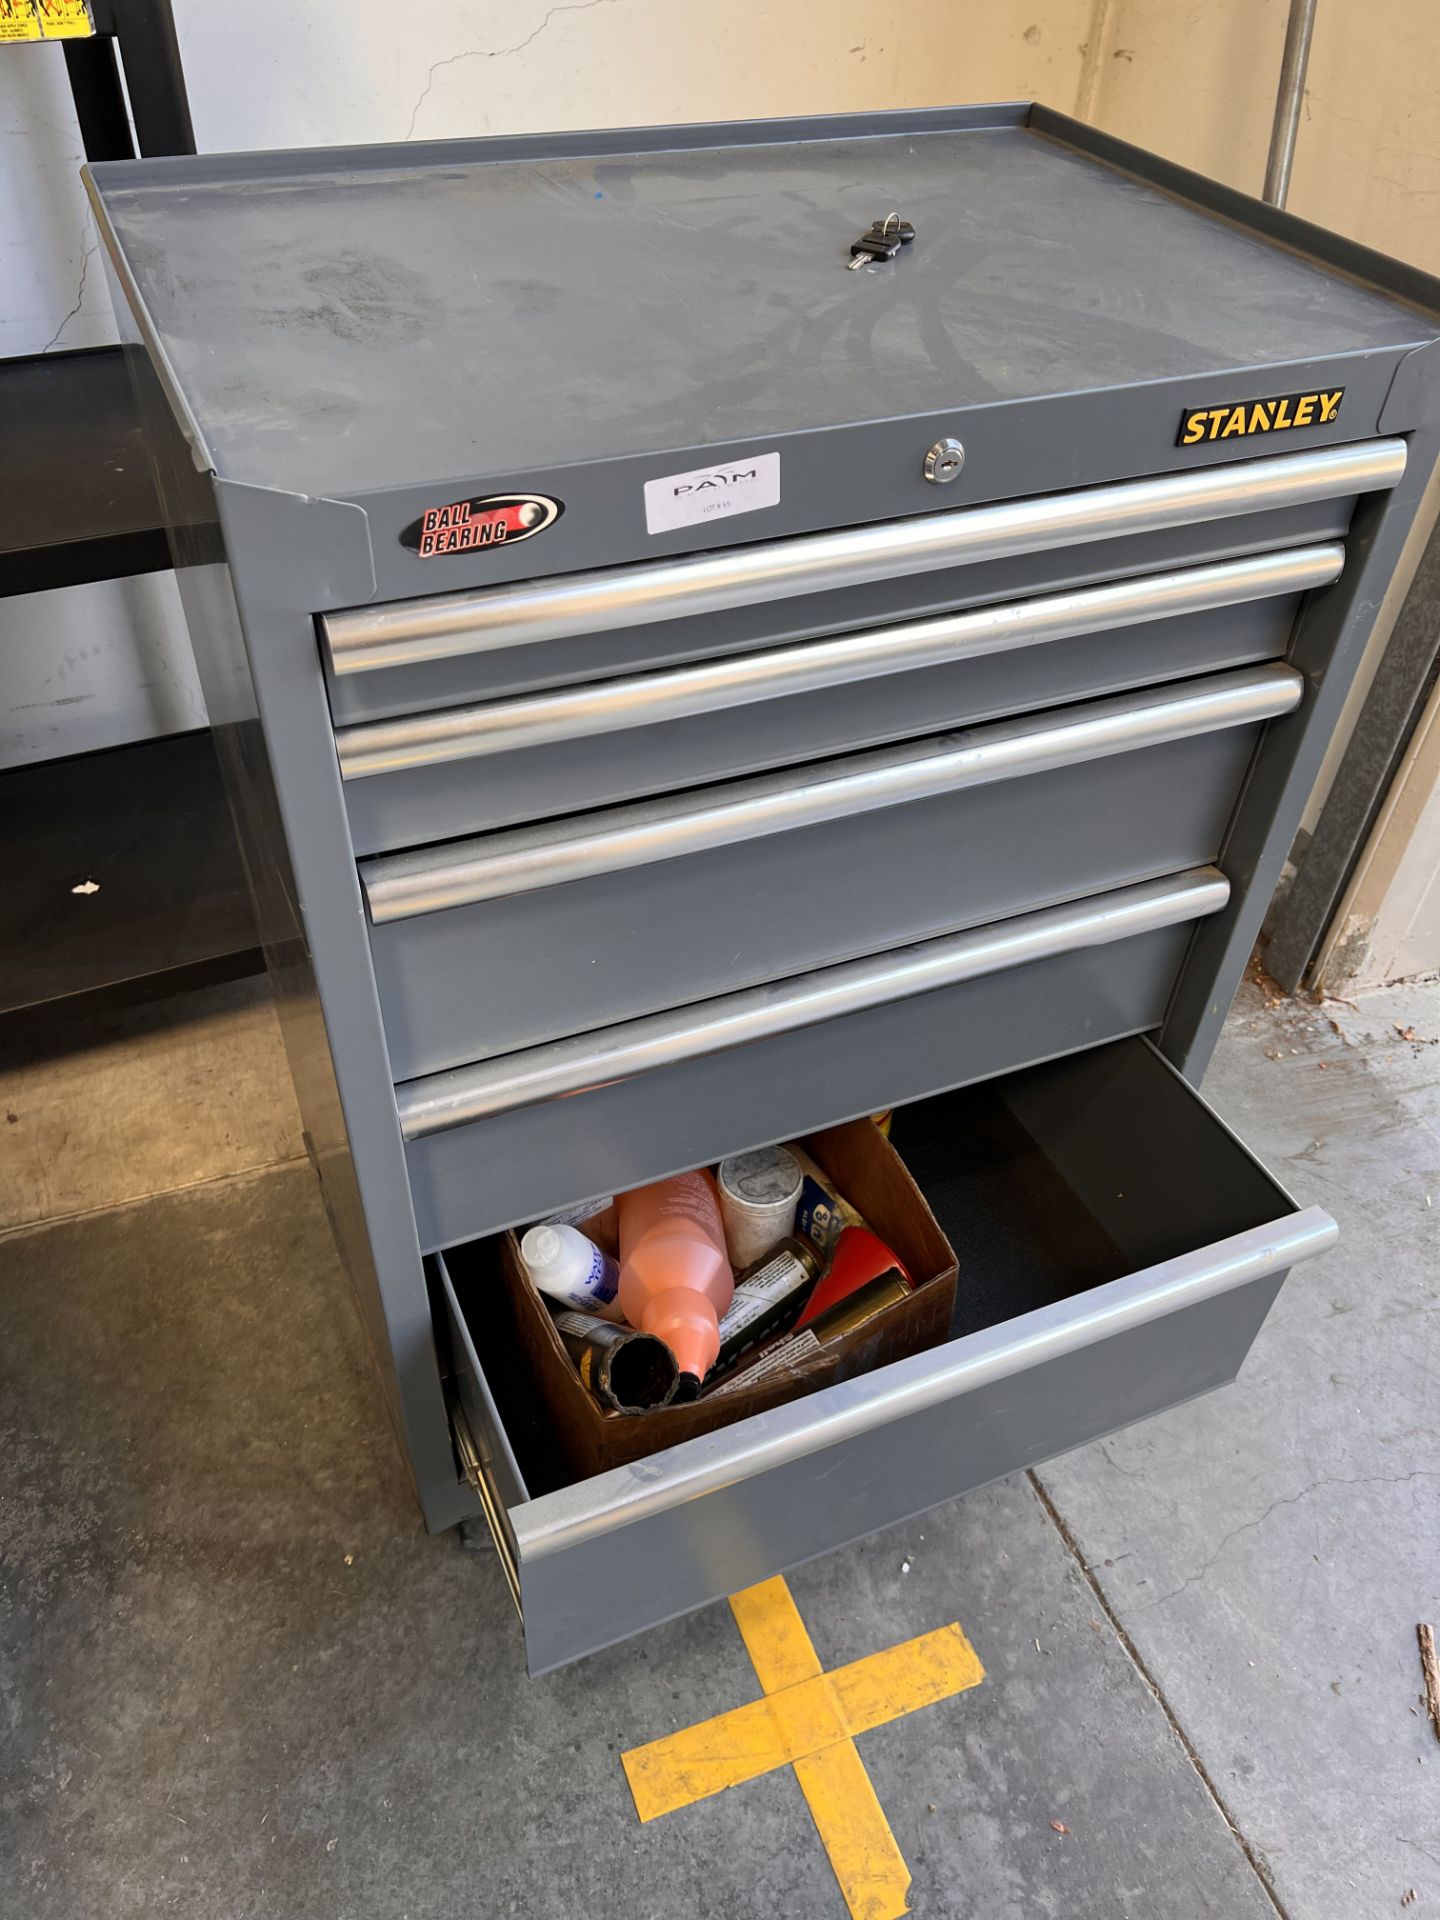 STANLEY 5 DRAWER ROLLING TOOL CABINET - Image 4 of 4